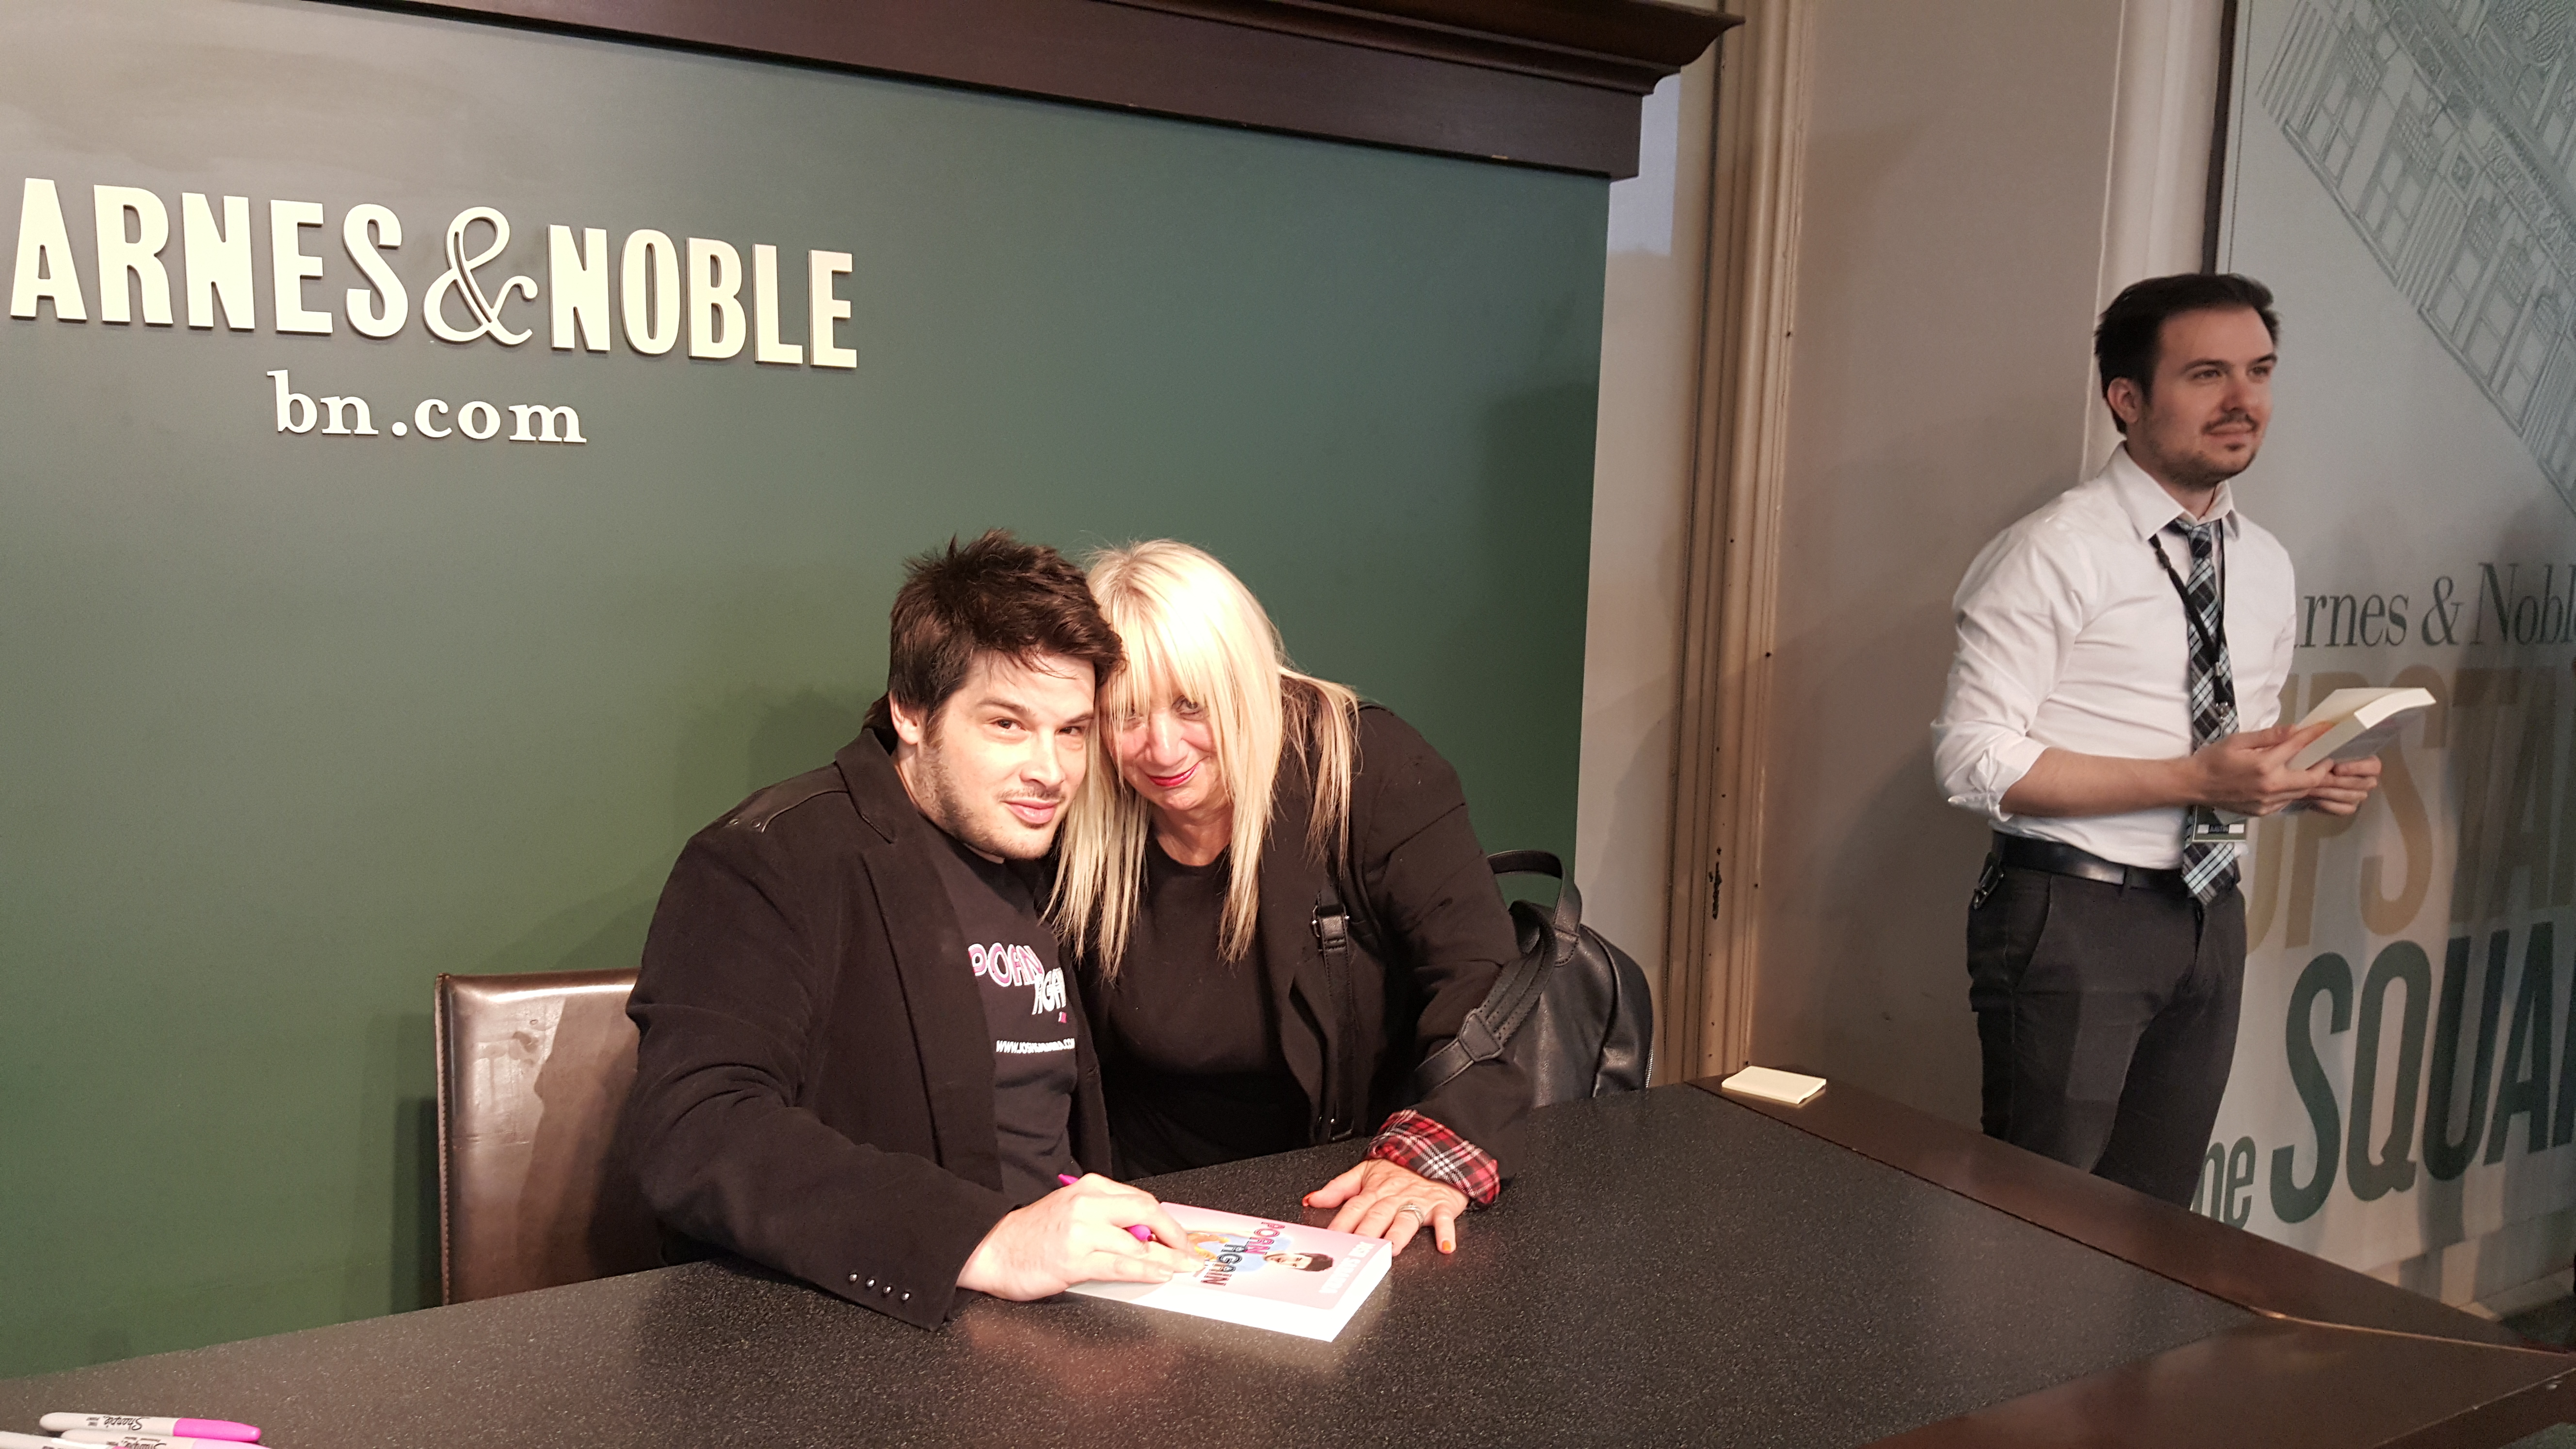  Barnes And Noble Welcomes  Celebrated Author Of “Porn Again” Josh Sabarra